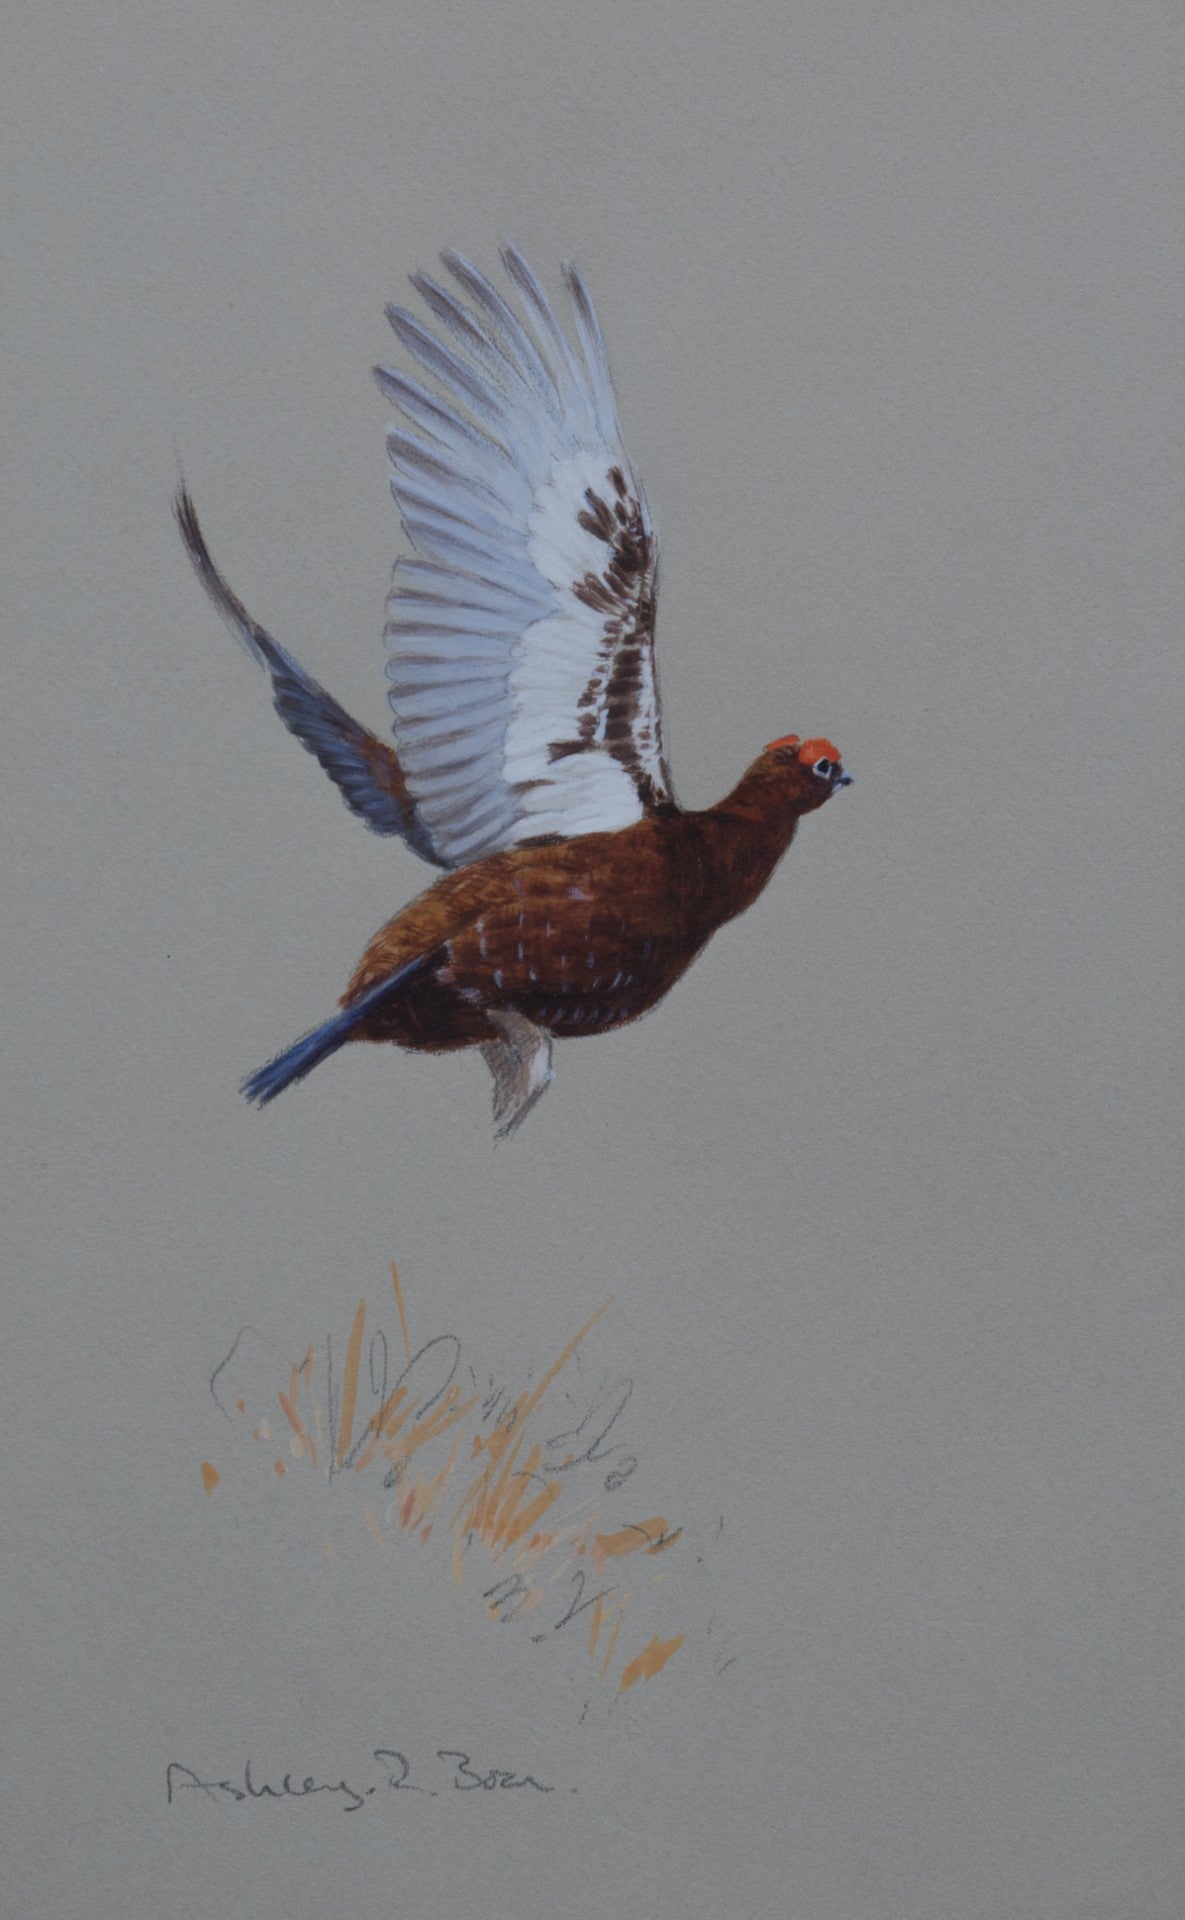 'Lifting Grouse' Original watercolour by Ashley Boon - 9.75" x 6.25"